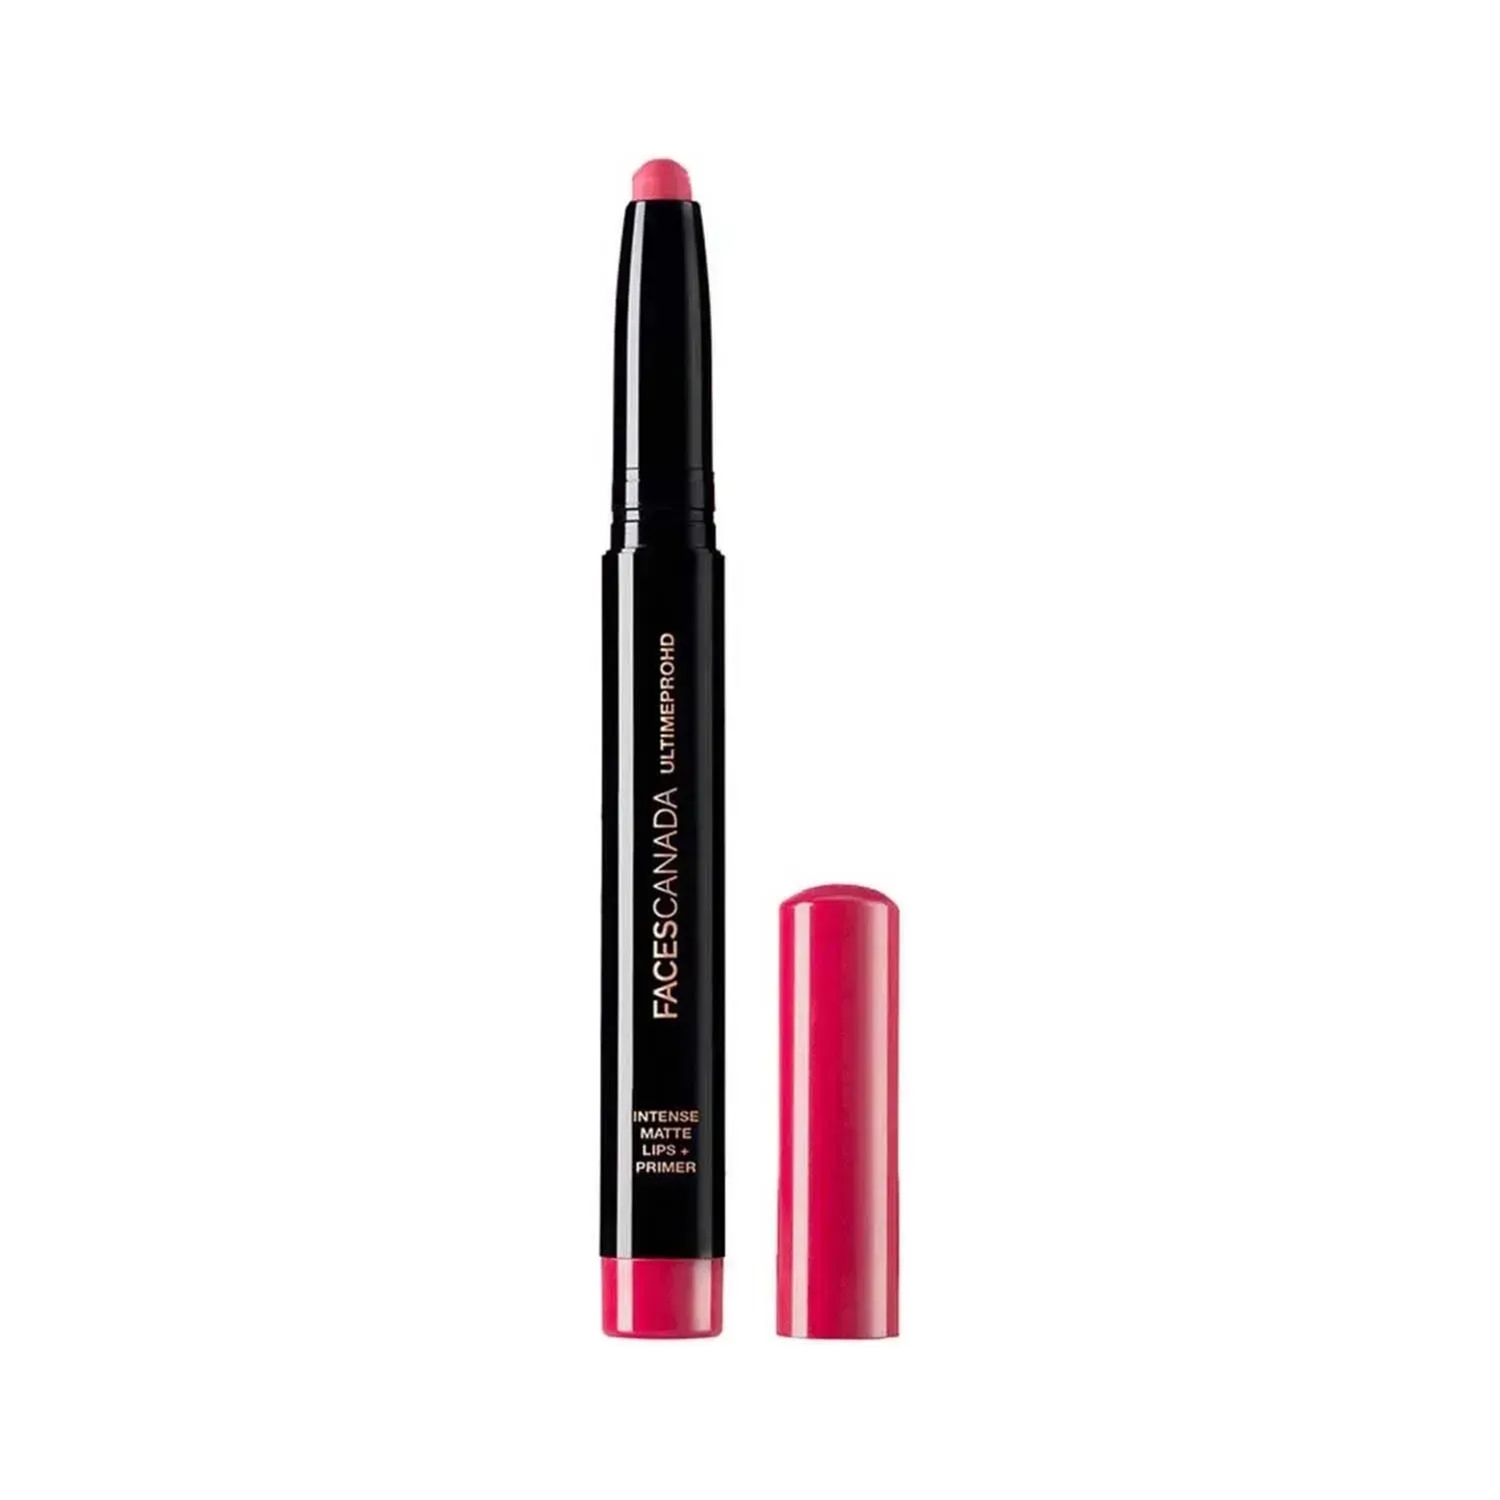 Faces Canada | Faces Canada Ultime Pro HD Intense Matte Lips + Primer - 05 Dash Of Pink (1.4g)